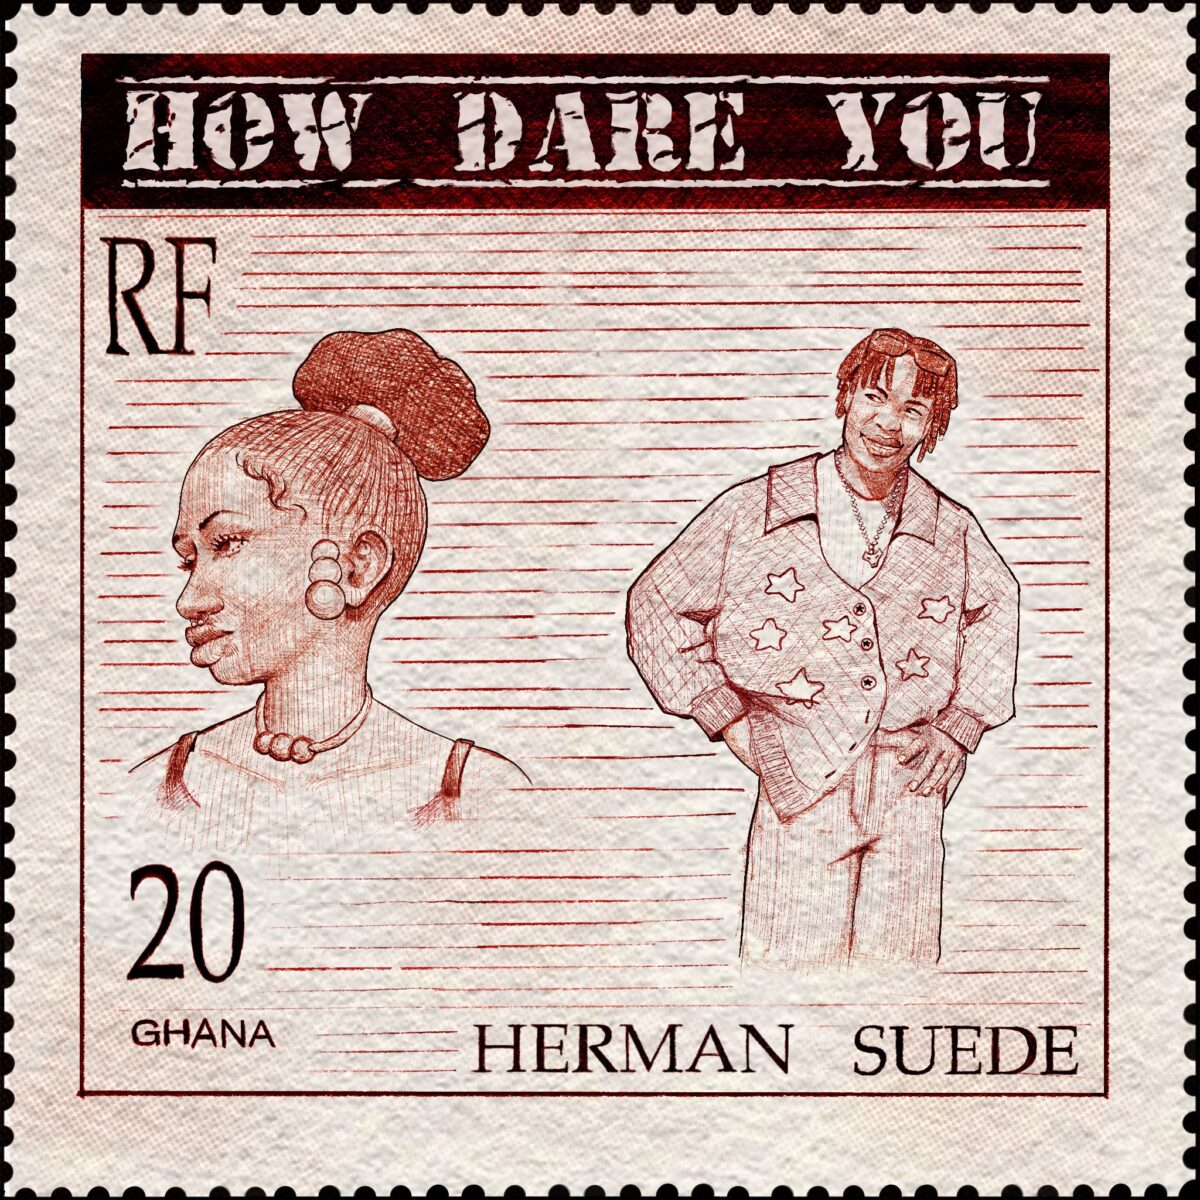 How Dare You by Herman Suede